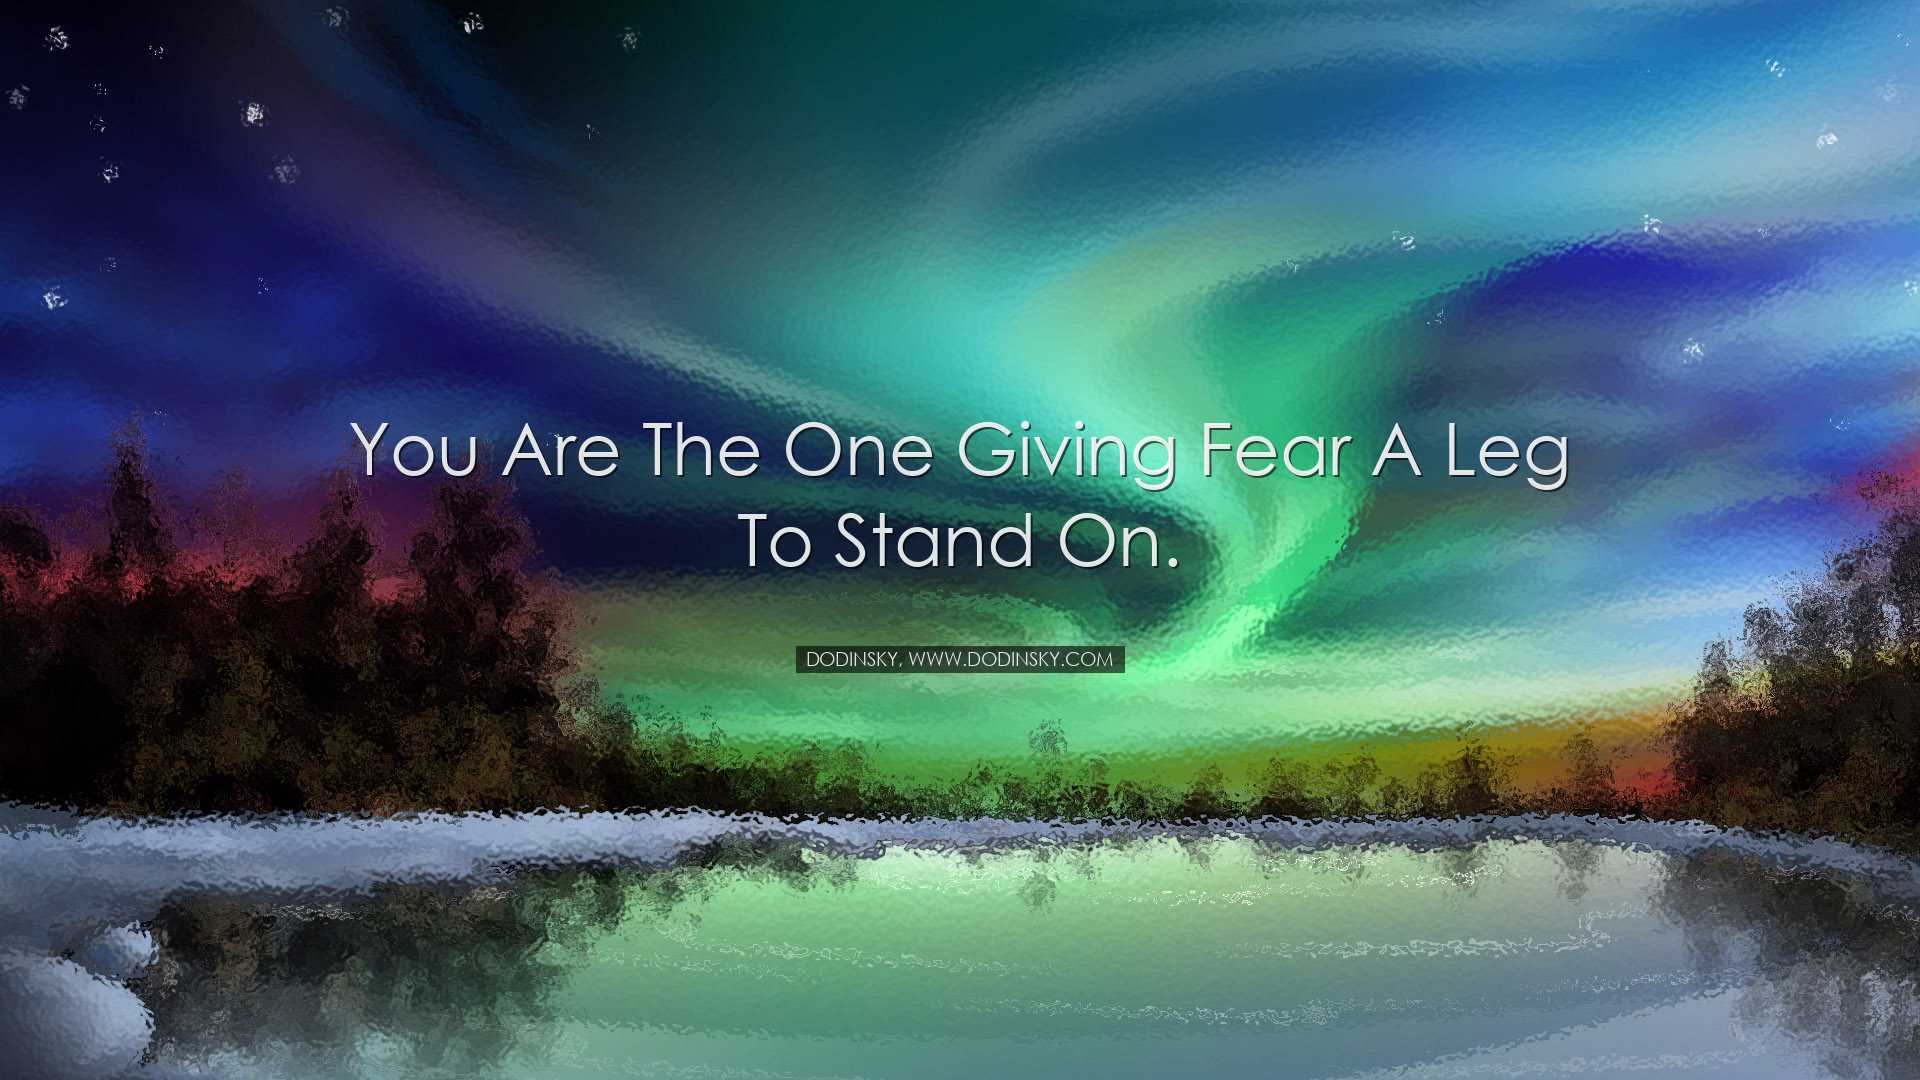 You are the one giving fear a leg to stand on. - Dodinsky, www.dod